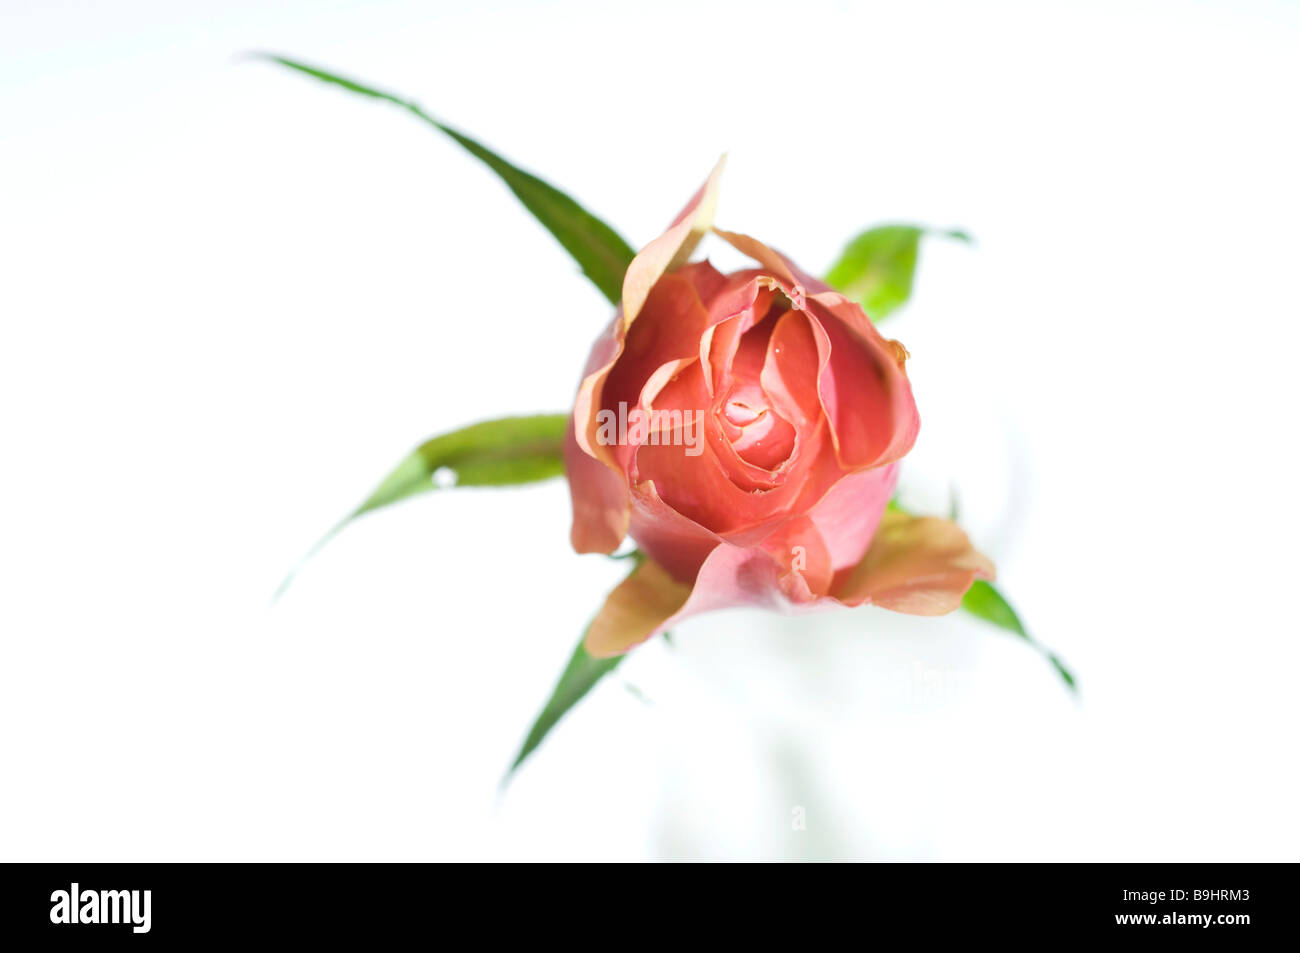 Flower of a pink rose with green leaves Stock Photo